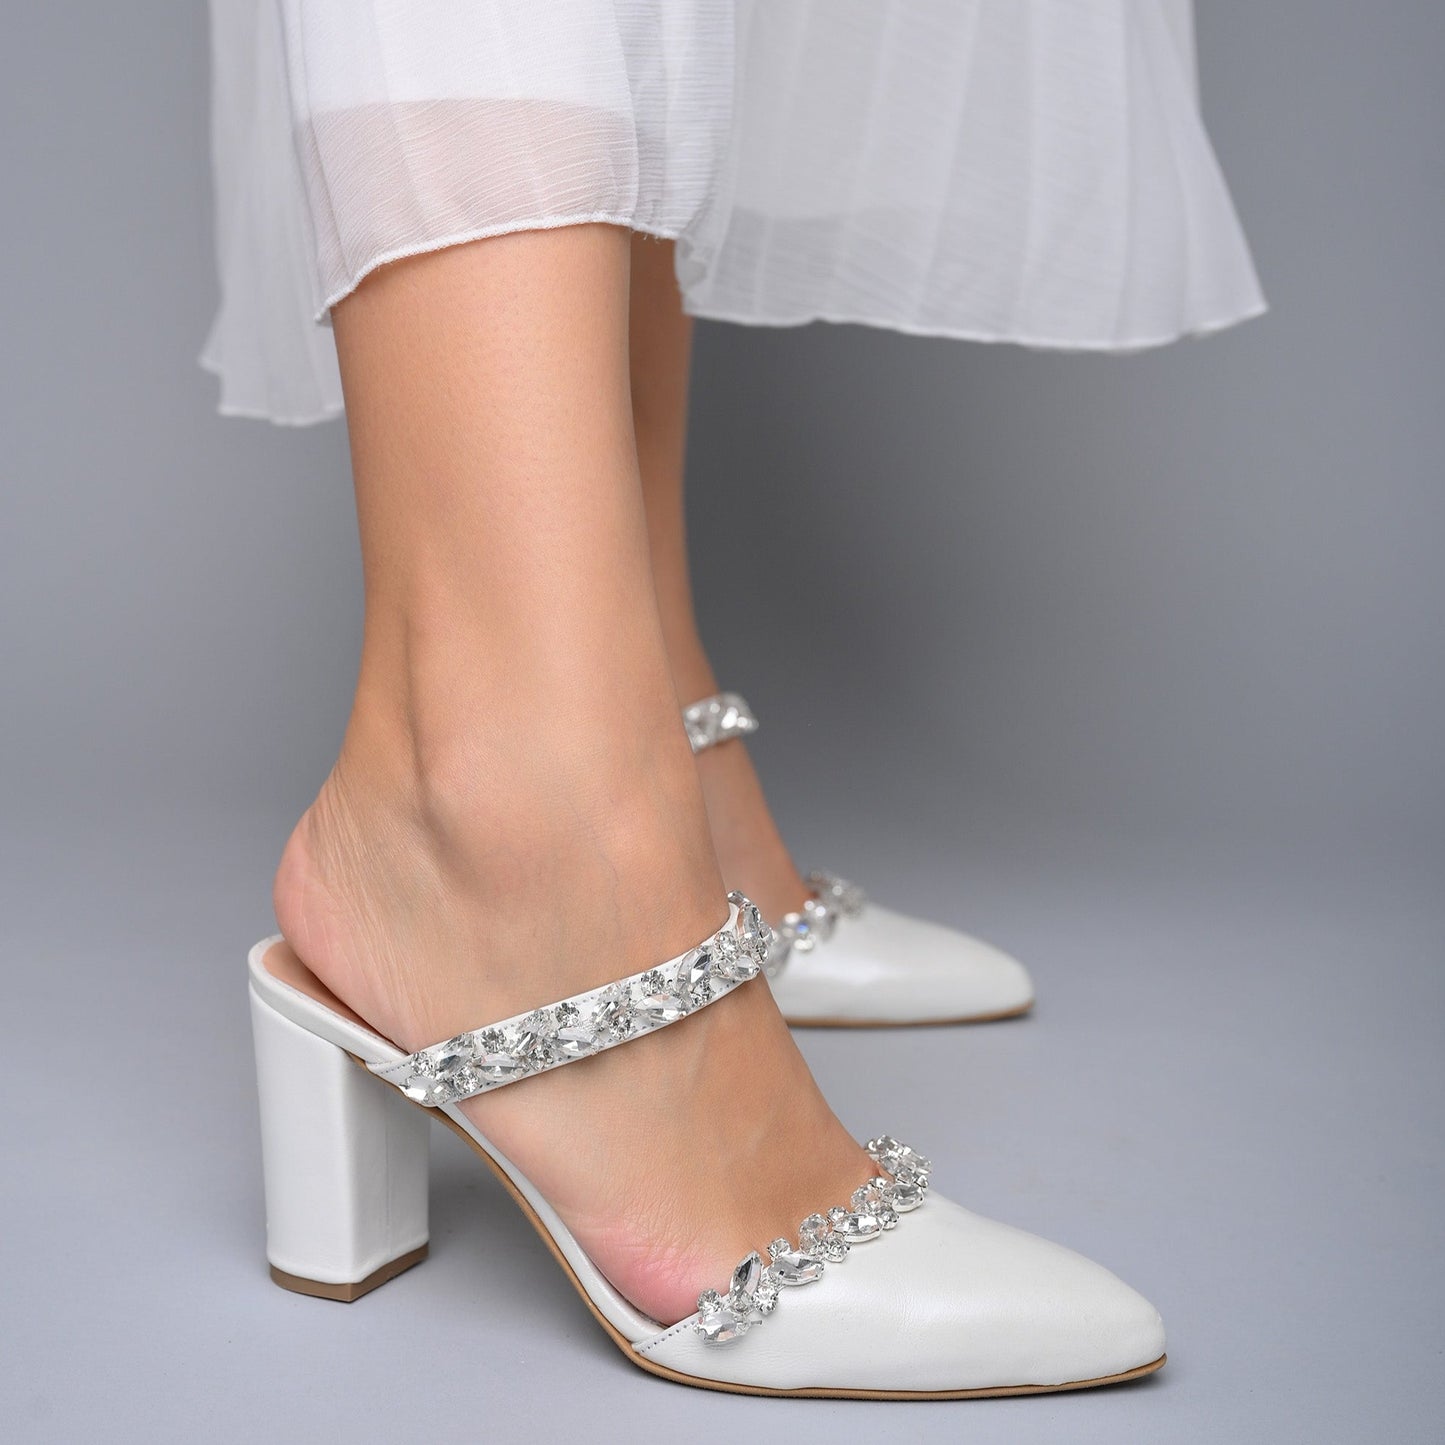 Buy Crystal Queen Women High Heels Sandals White Lace Pearls Wedding Shoes  Pointed Toe Bridal Shoes (4.5, Tassel Pearls) at Amazon.in